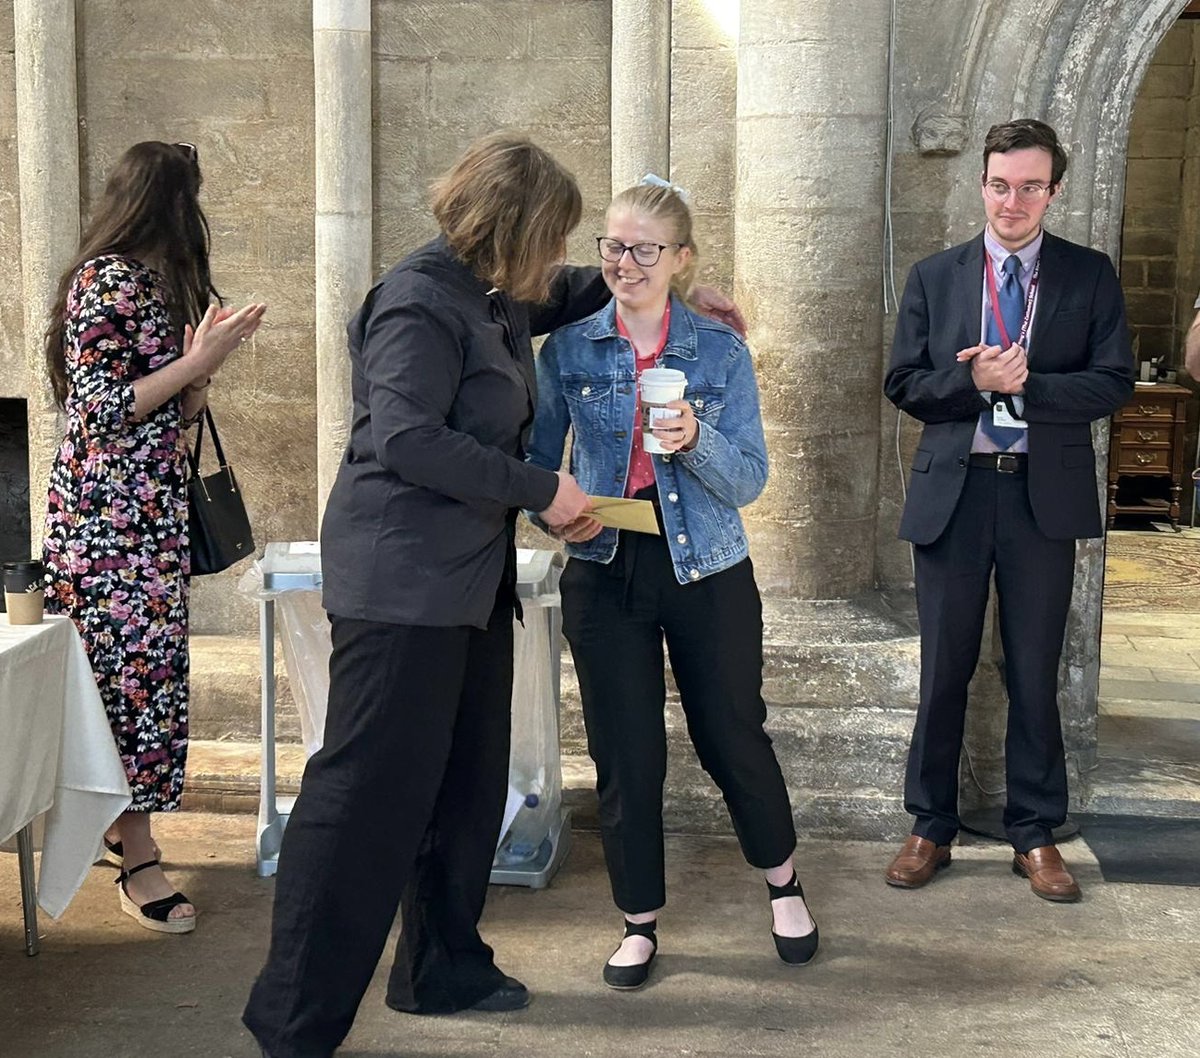 Today we bid farewell to Olivia Parker-Timms, our phenomenal Music Department Administrator! Olivia's dedication & talent will be sorely missed at the Cathedral. We are sad to see her go but excited for her new journey ahead. Wishing you all the success in the world!